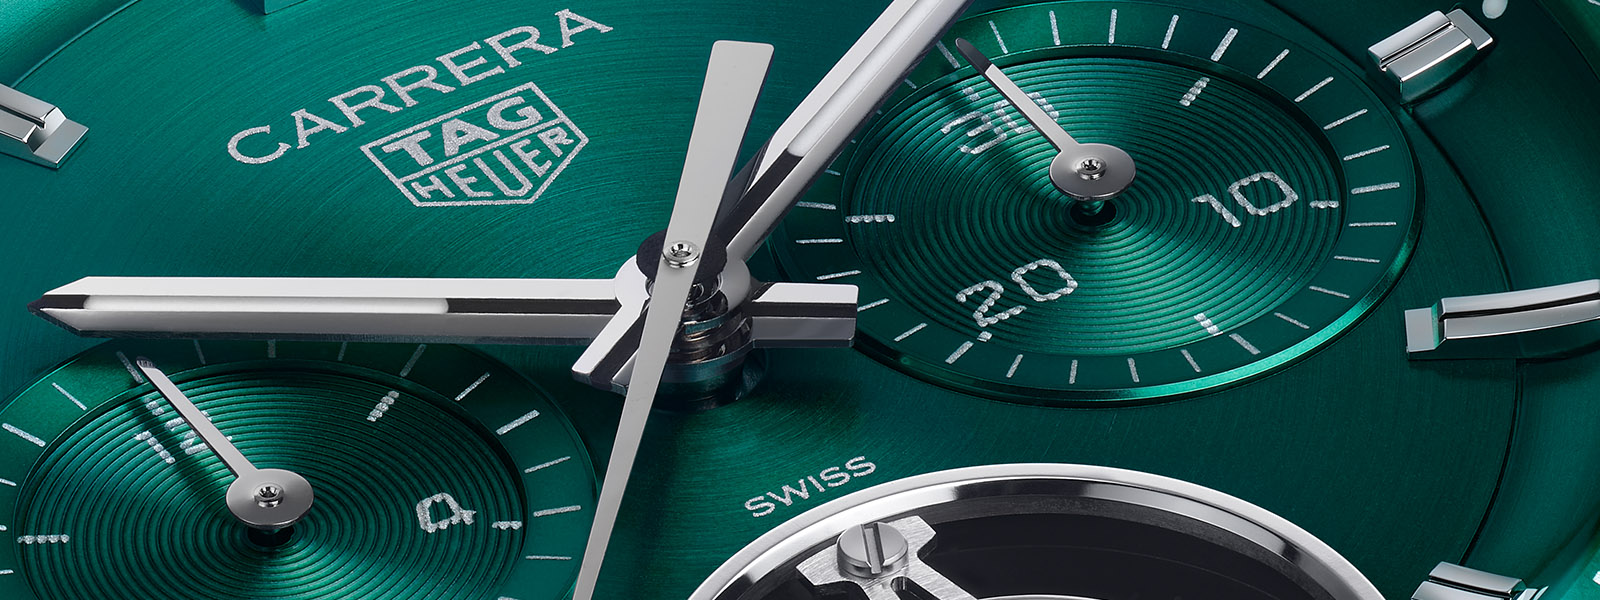 Watch Of The Week: The New TAG Heuer Carrera Tourbillon In Green